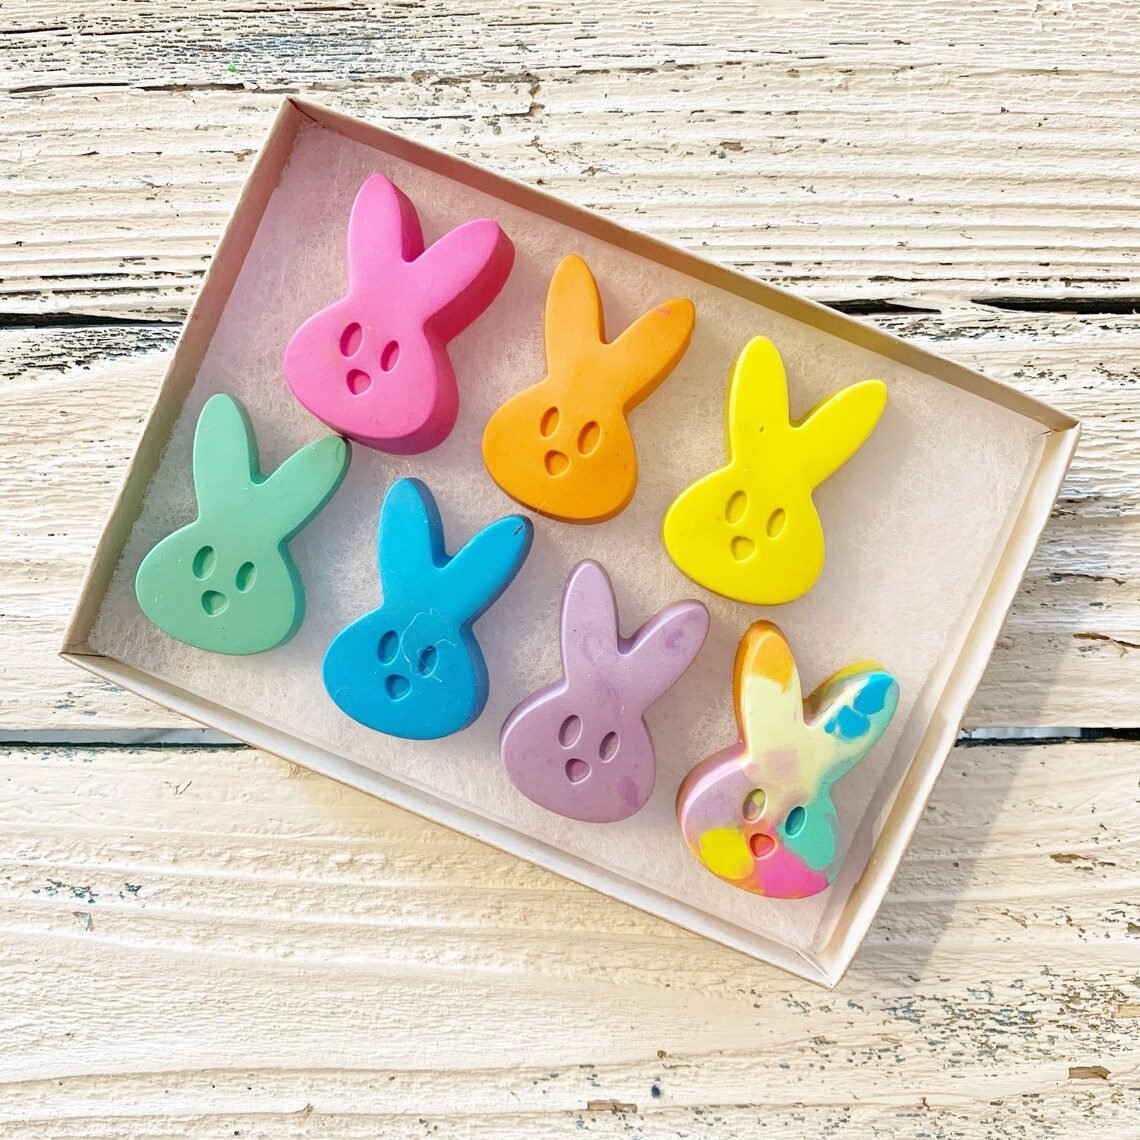 21 Easter basket fillers that would make any bunny happy